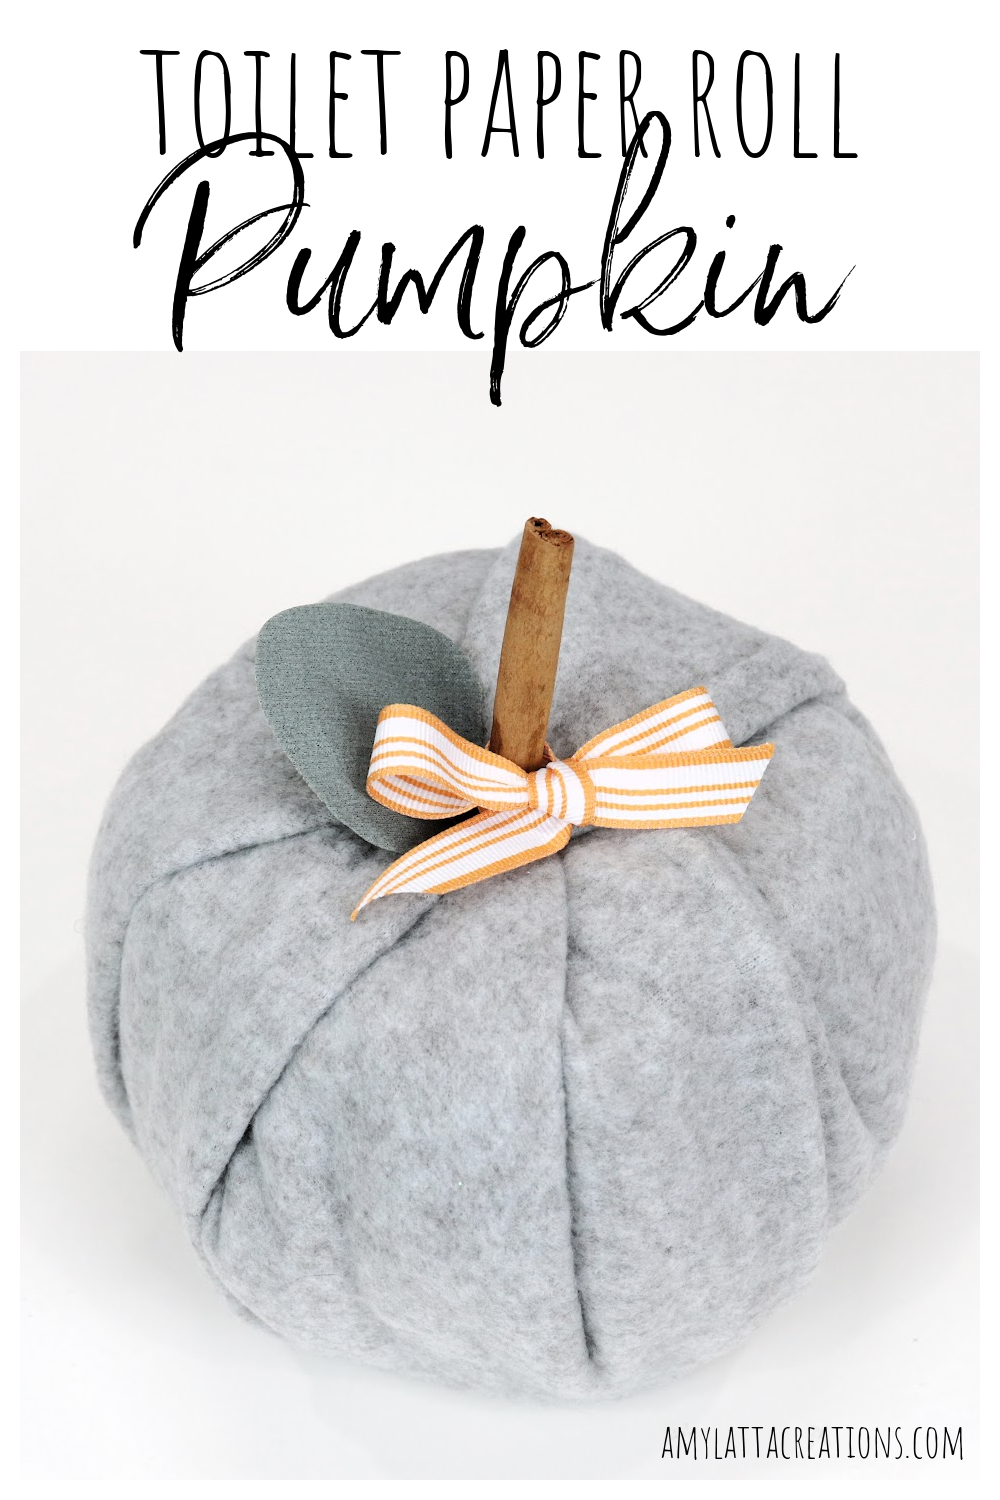 Image contains a pumpkin made of a toilet paper roll covered in grey fleece.